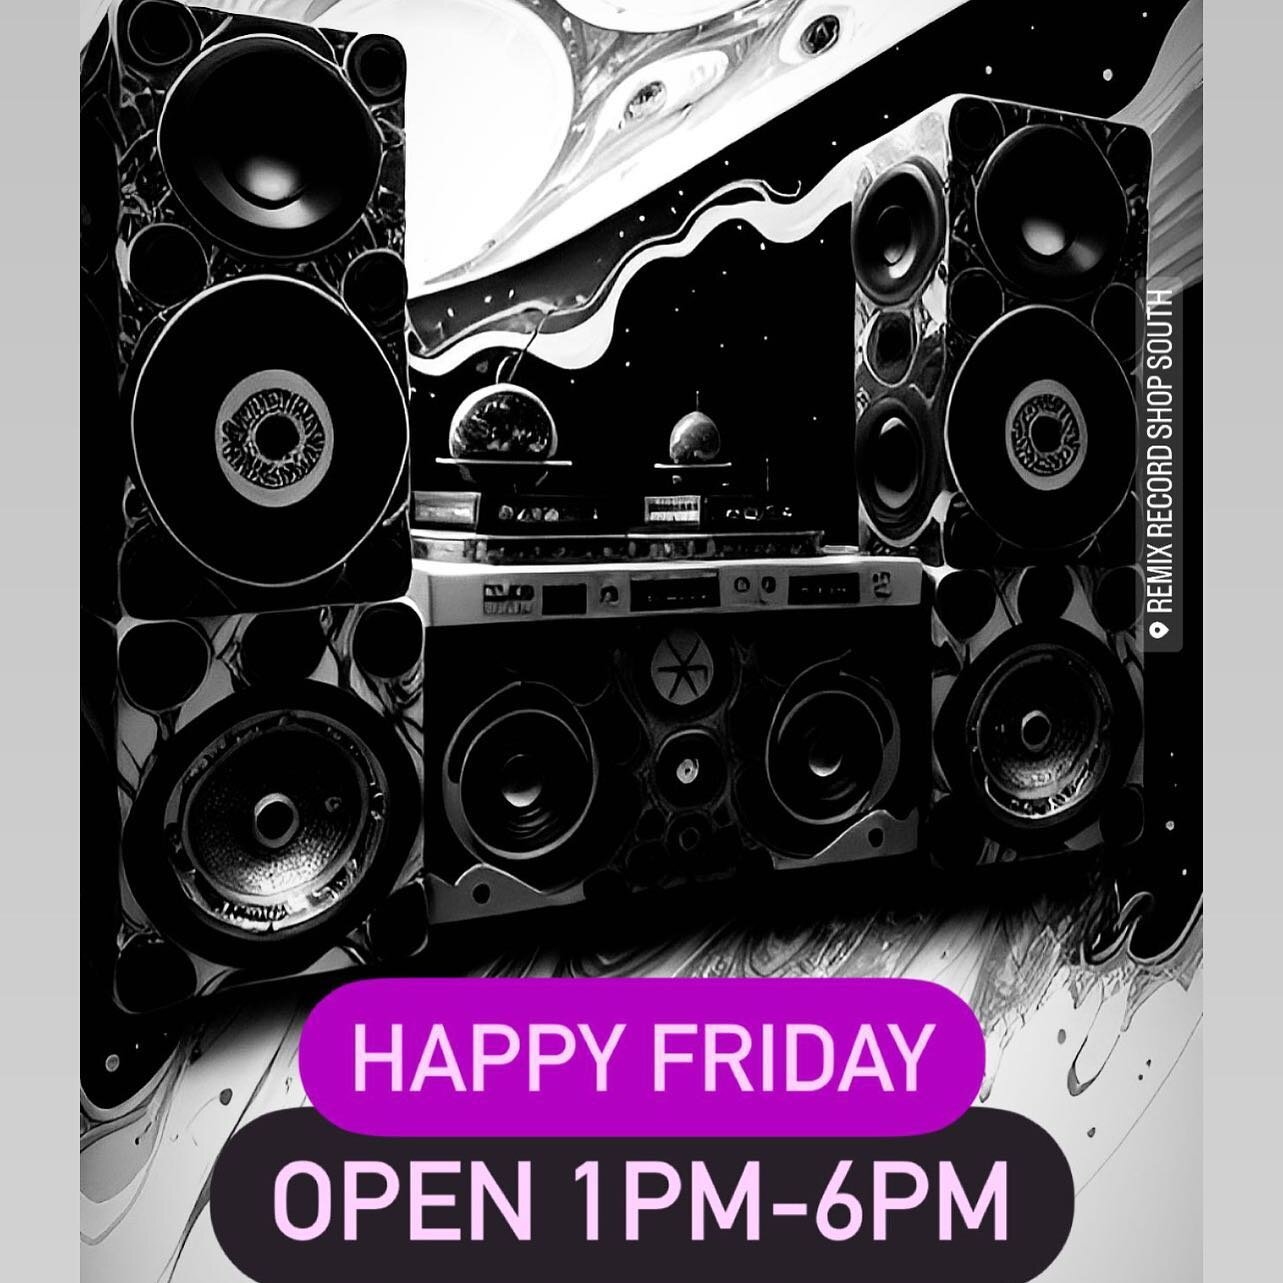 Happy Friday! Open from 1pm-6pm! 
The 12&rdquo; Electronic Dance Music Shop.
⚫️🎧⚫️